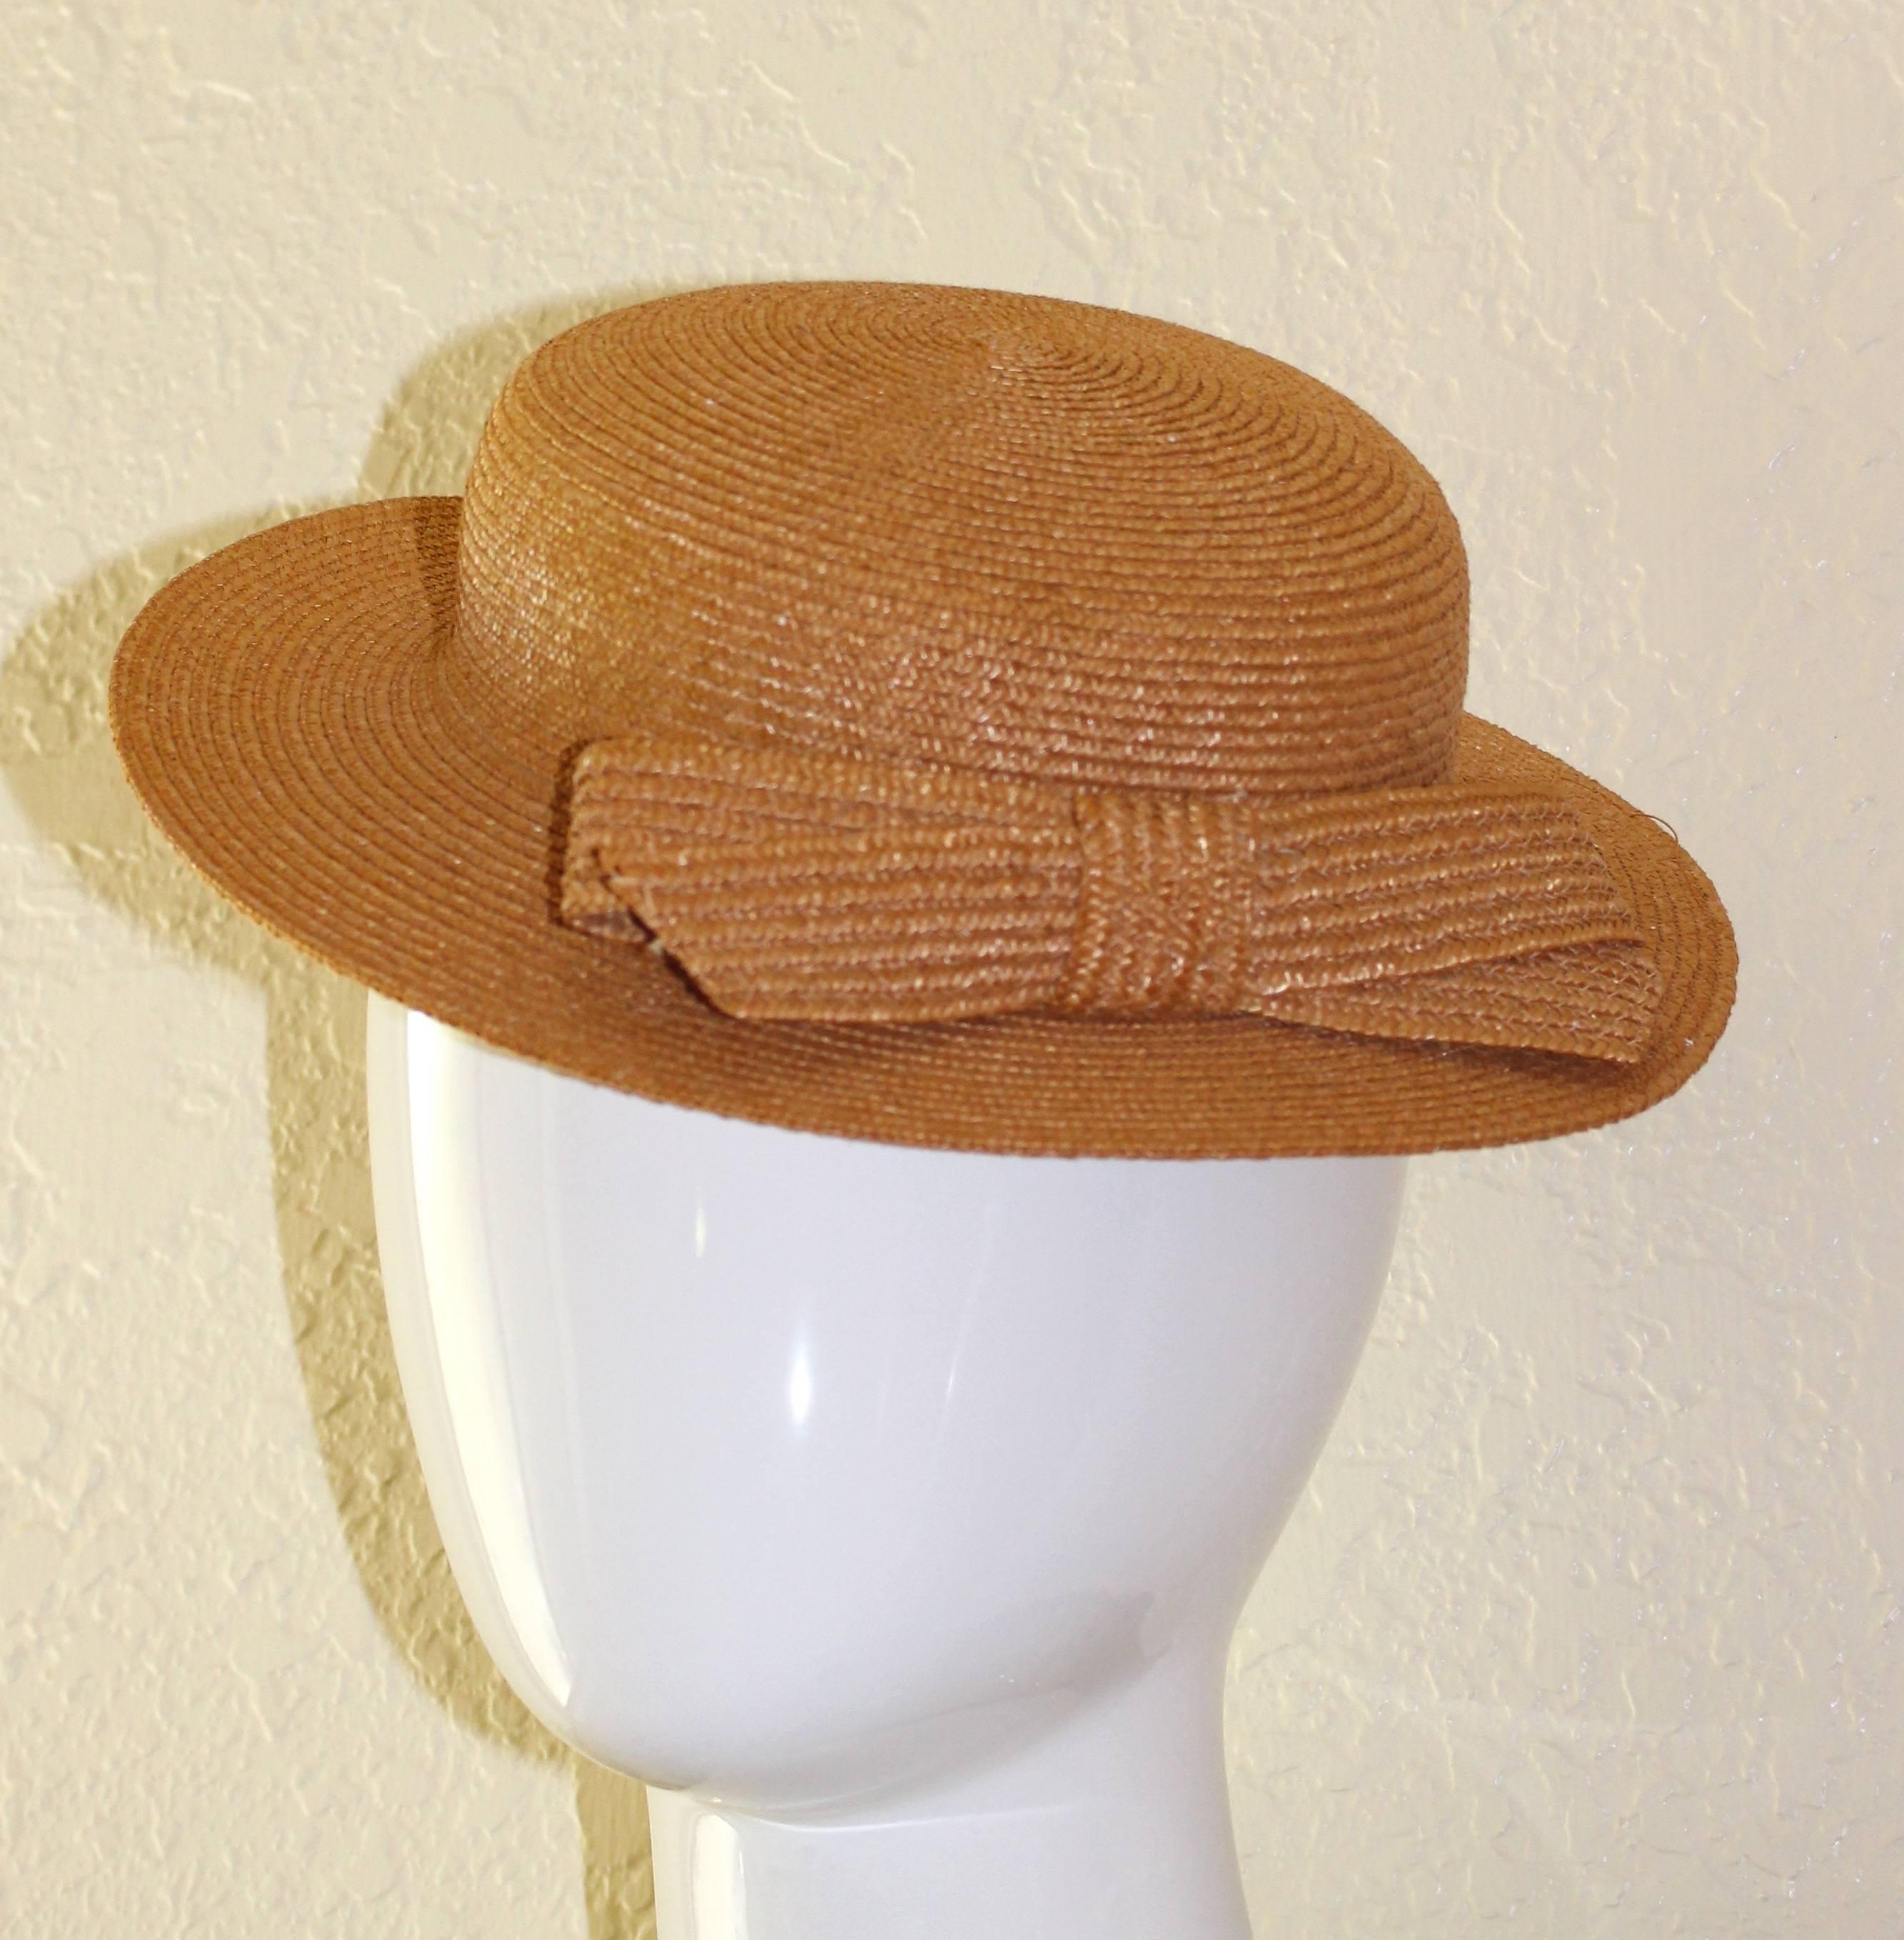 A 1960s Pucci hat.
Excellent condition.

Measurements:
Hat: 11 inch circle
Brim: 2 inches
Crown: 2 inches
Inner circumference: 21 inches
Bow: 7 inches long